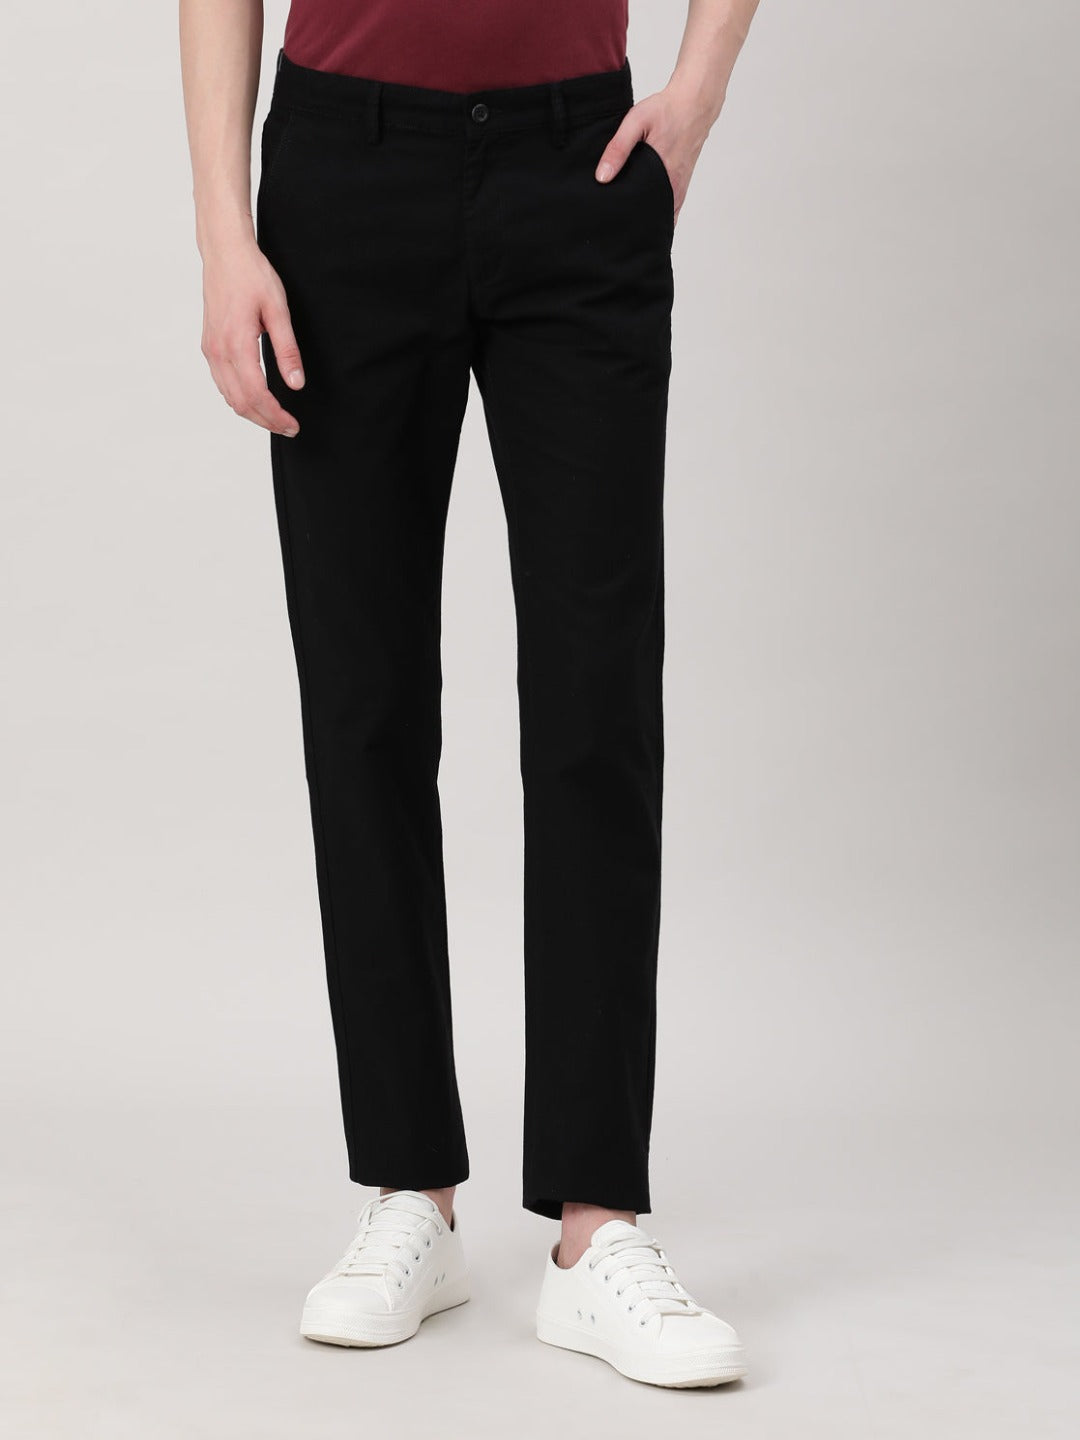 Casual Trousers Slim Fit Solid Black for Men